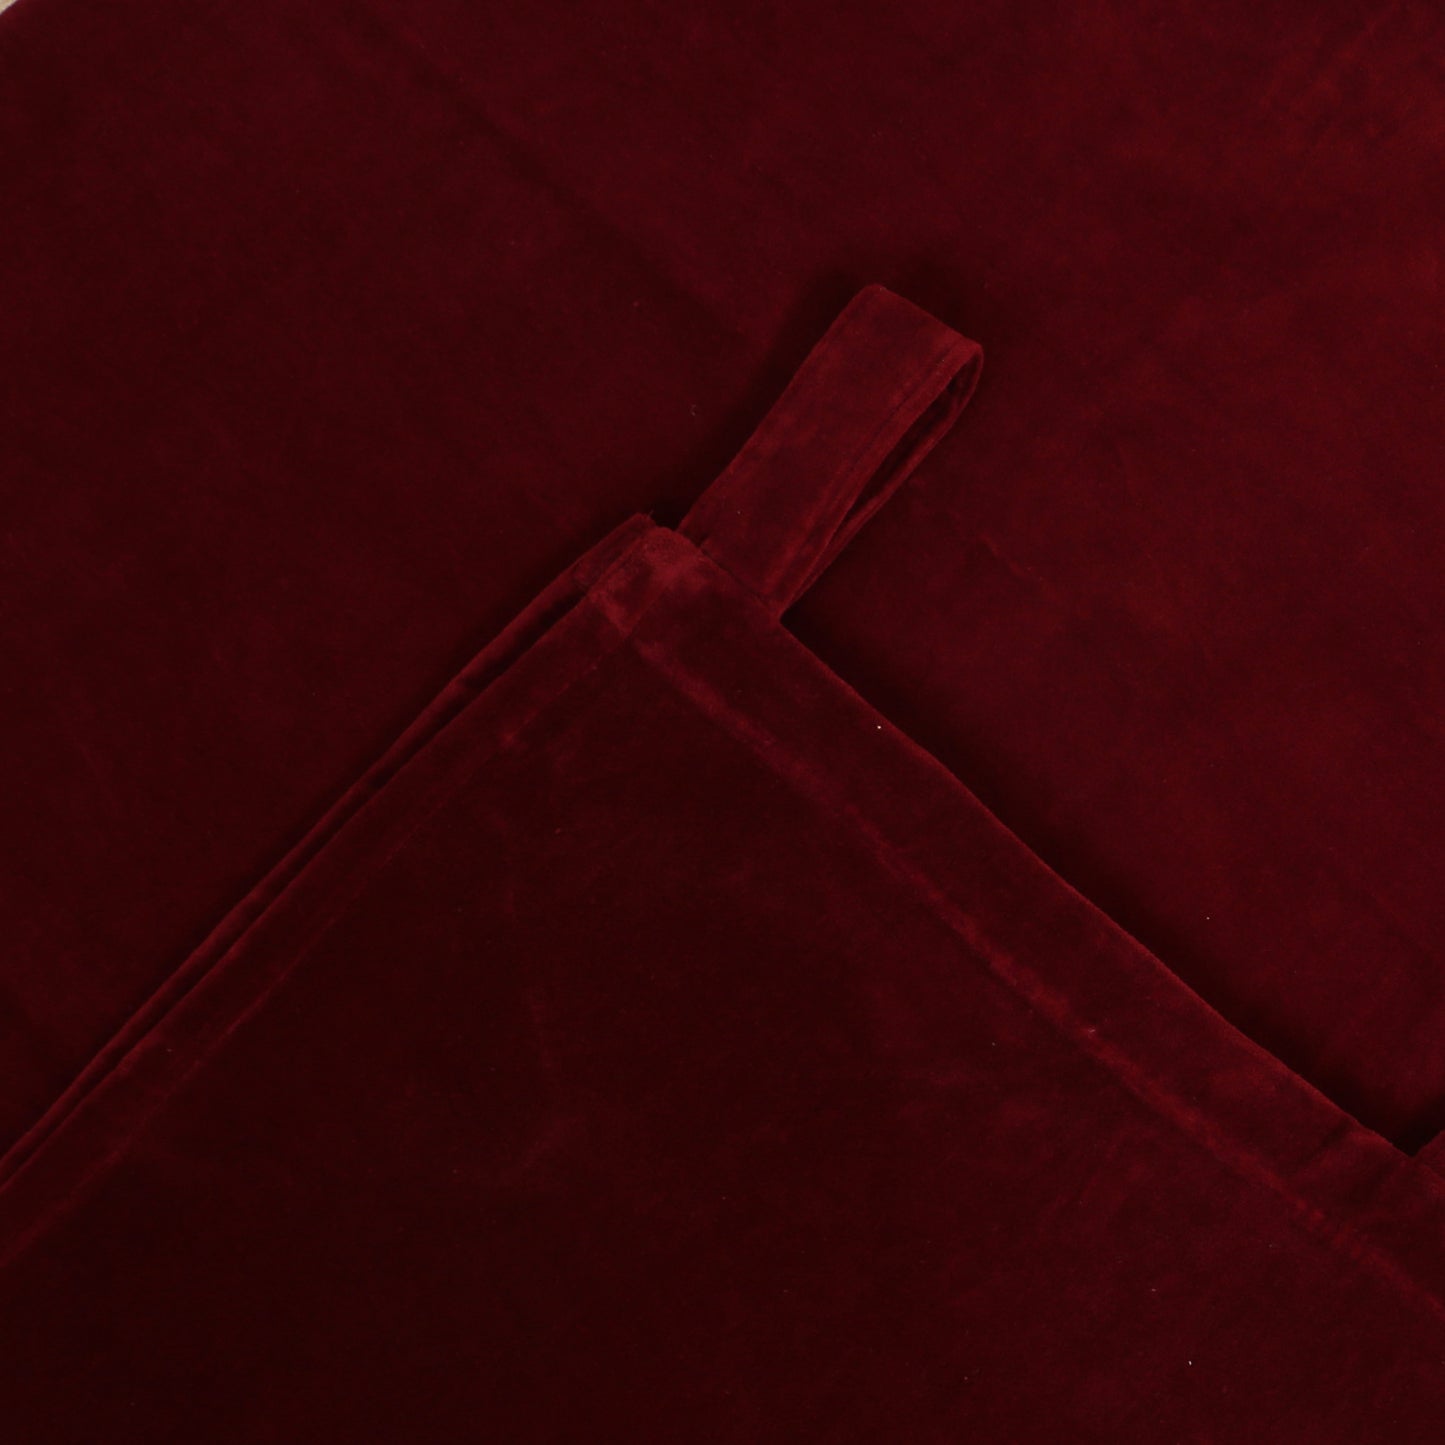 Solid Color 1 Velvet Curtain- Maroon